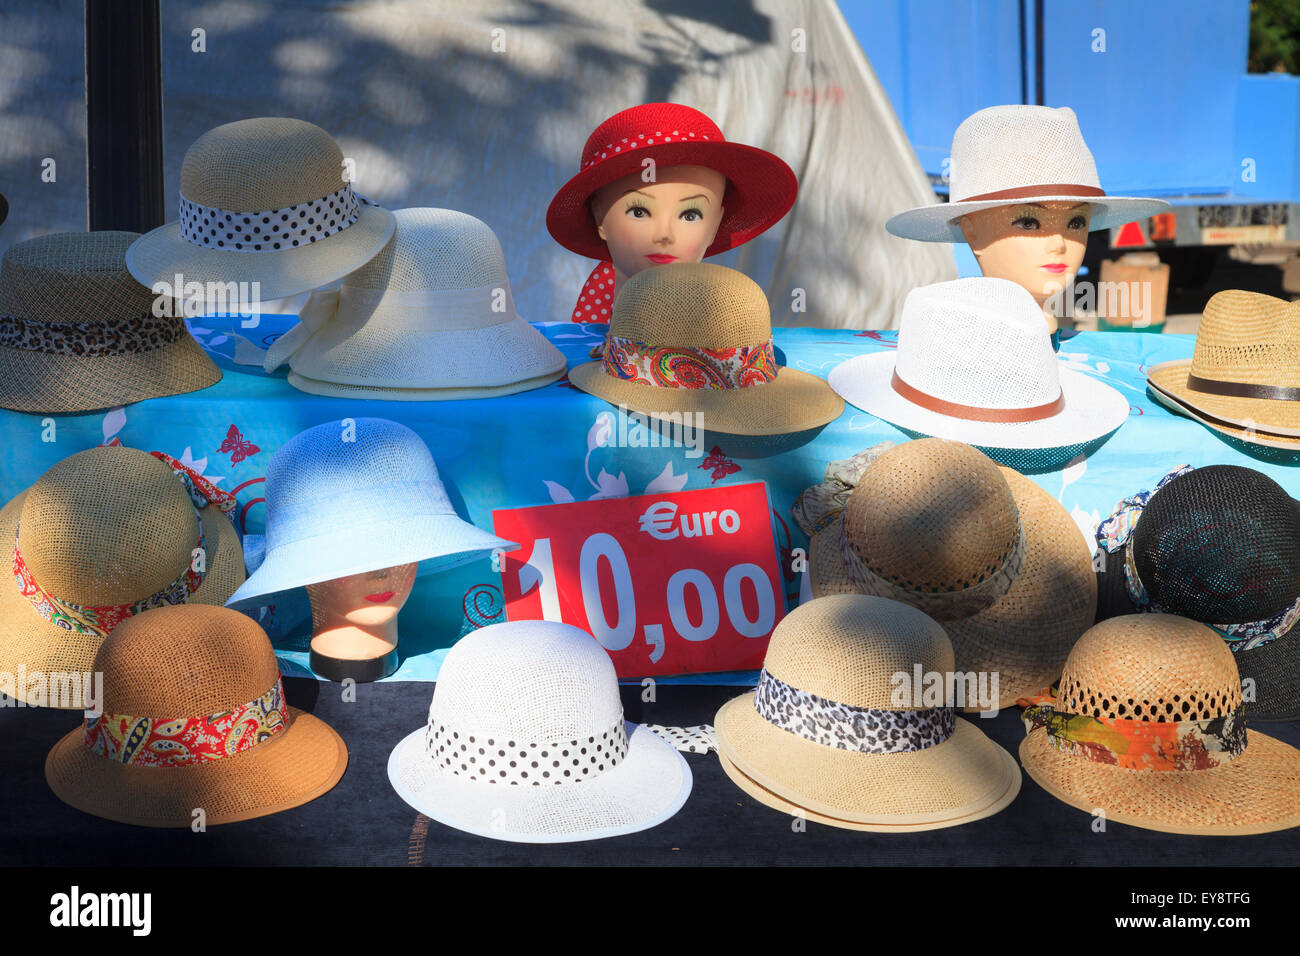 Display of hats on a french market stall Stock Photo